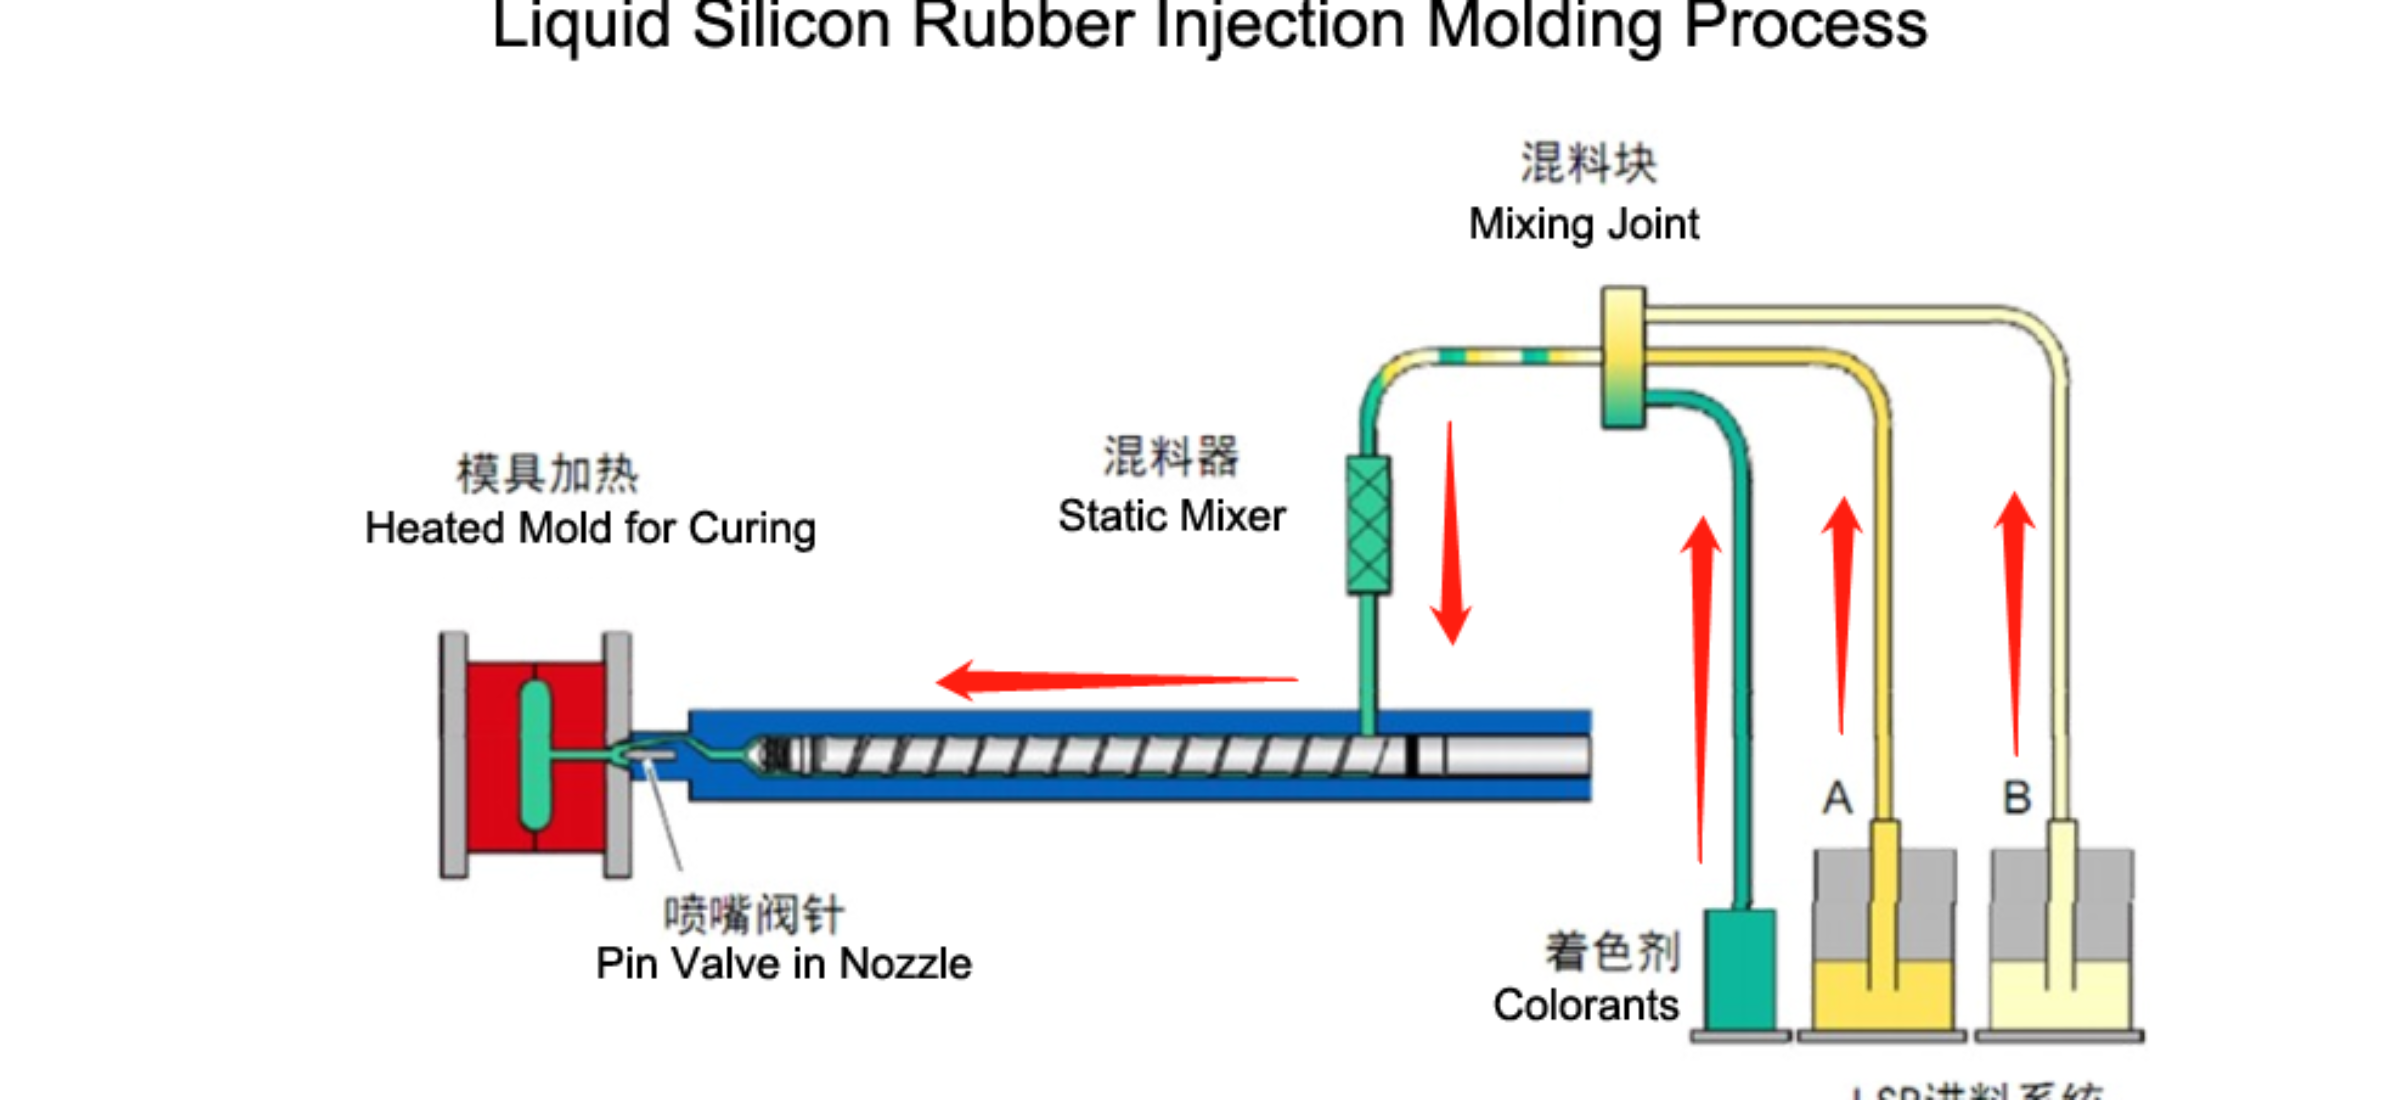 Liquid Silicone Injection Molding Process